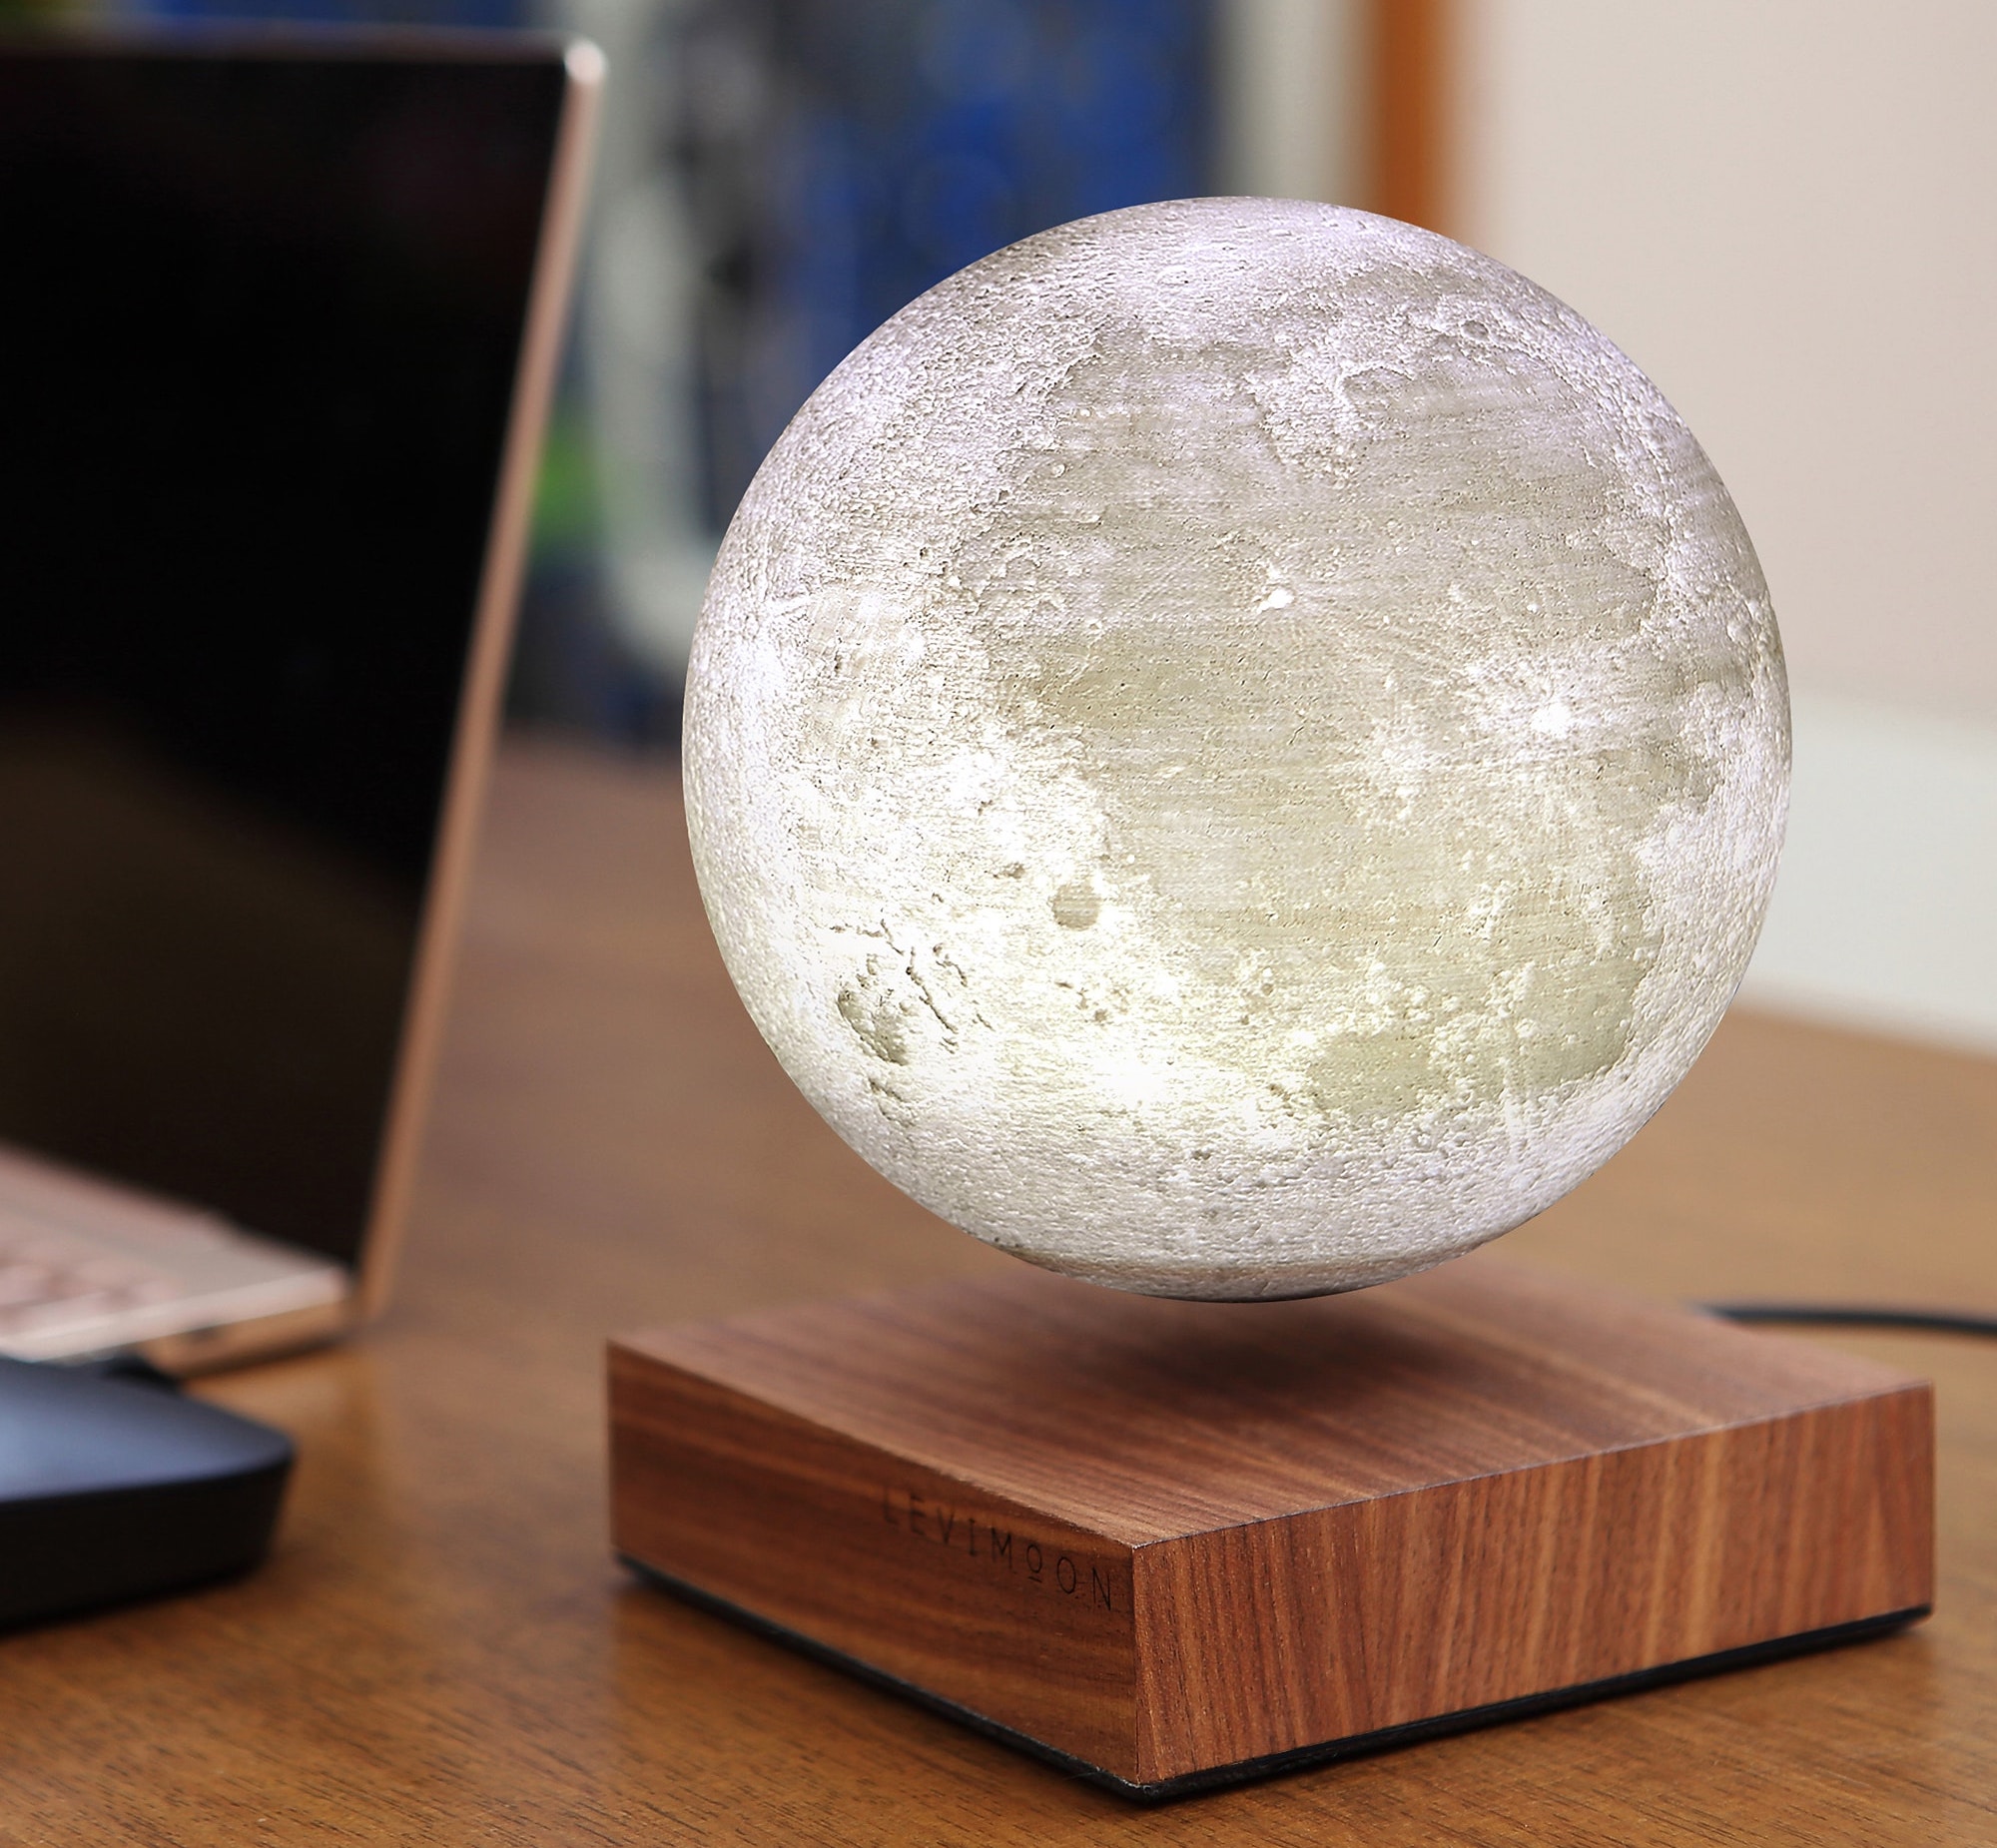 This Badass 3D Printed Levitating Moon Lamp Will Blow Your